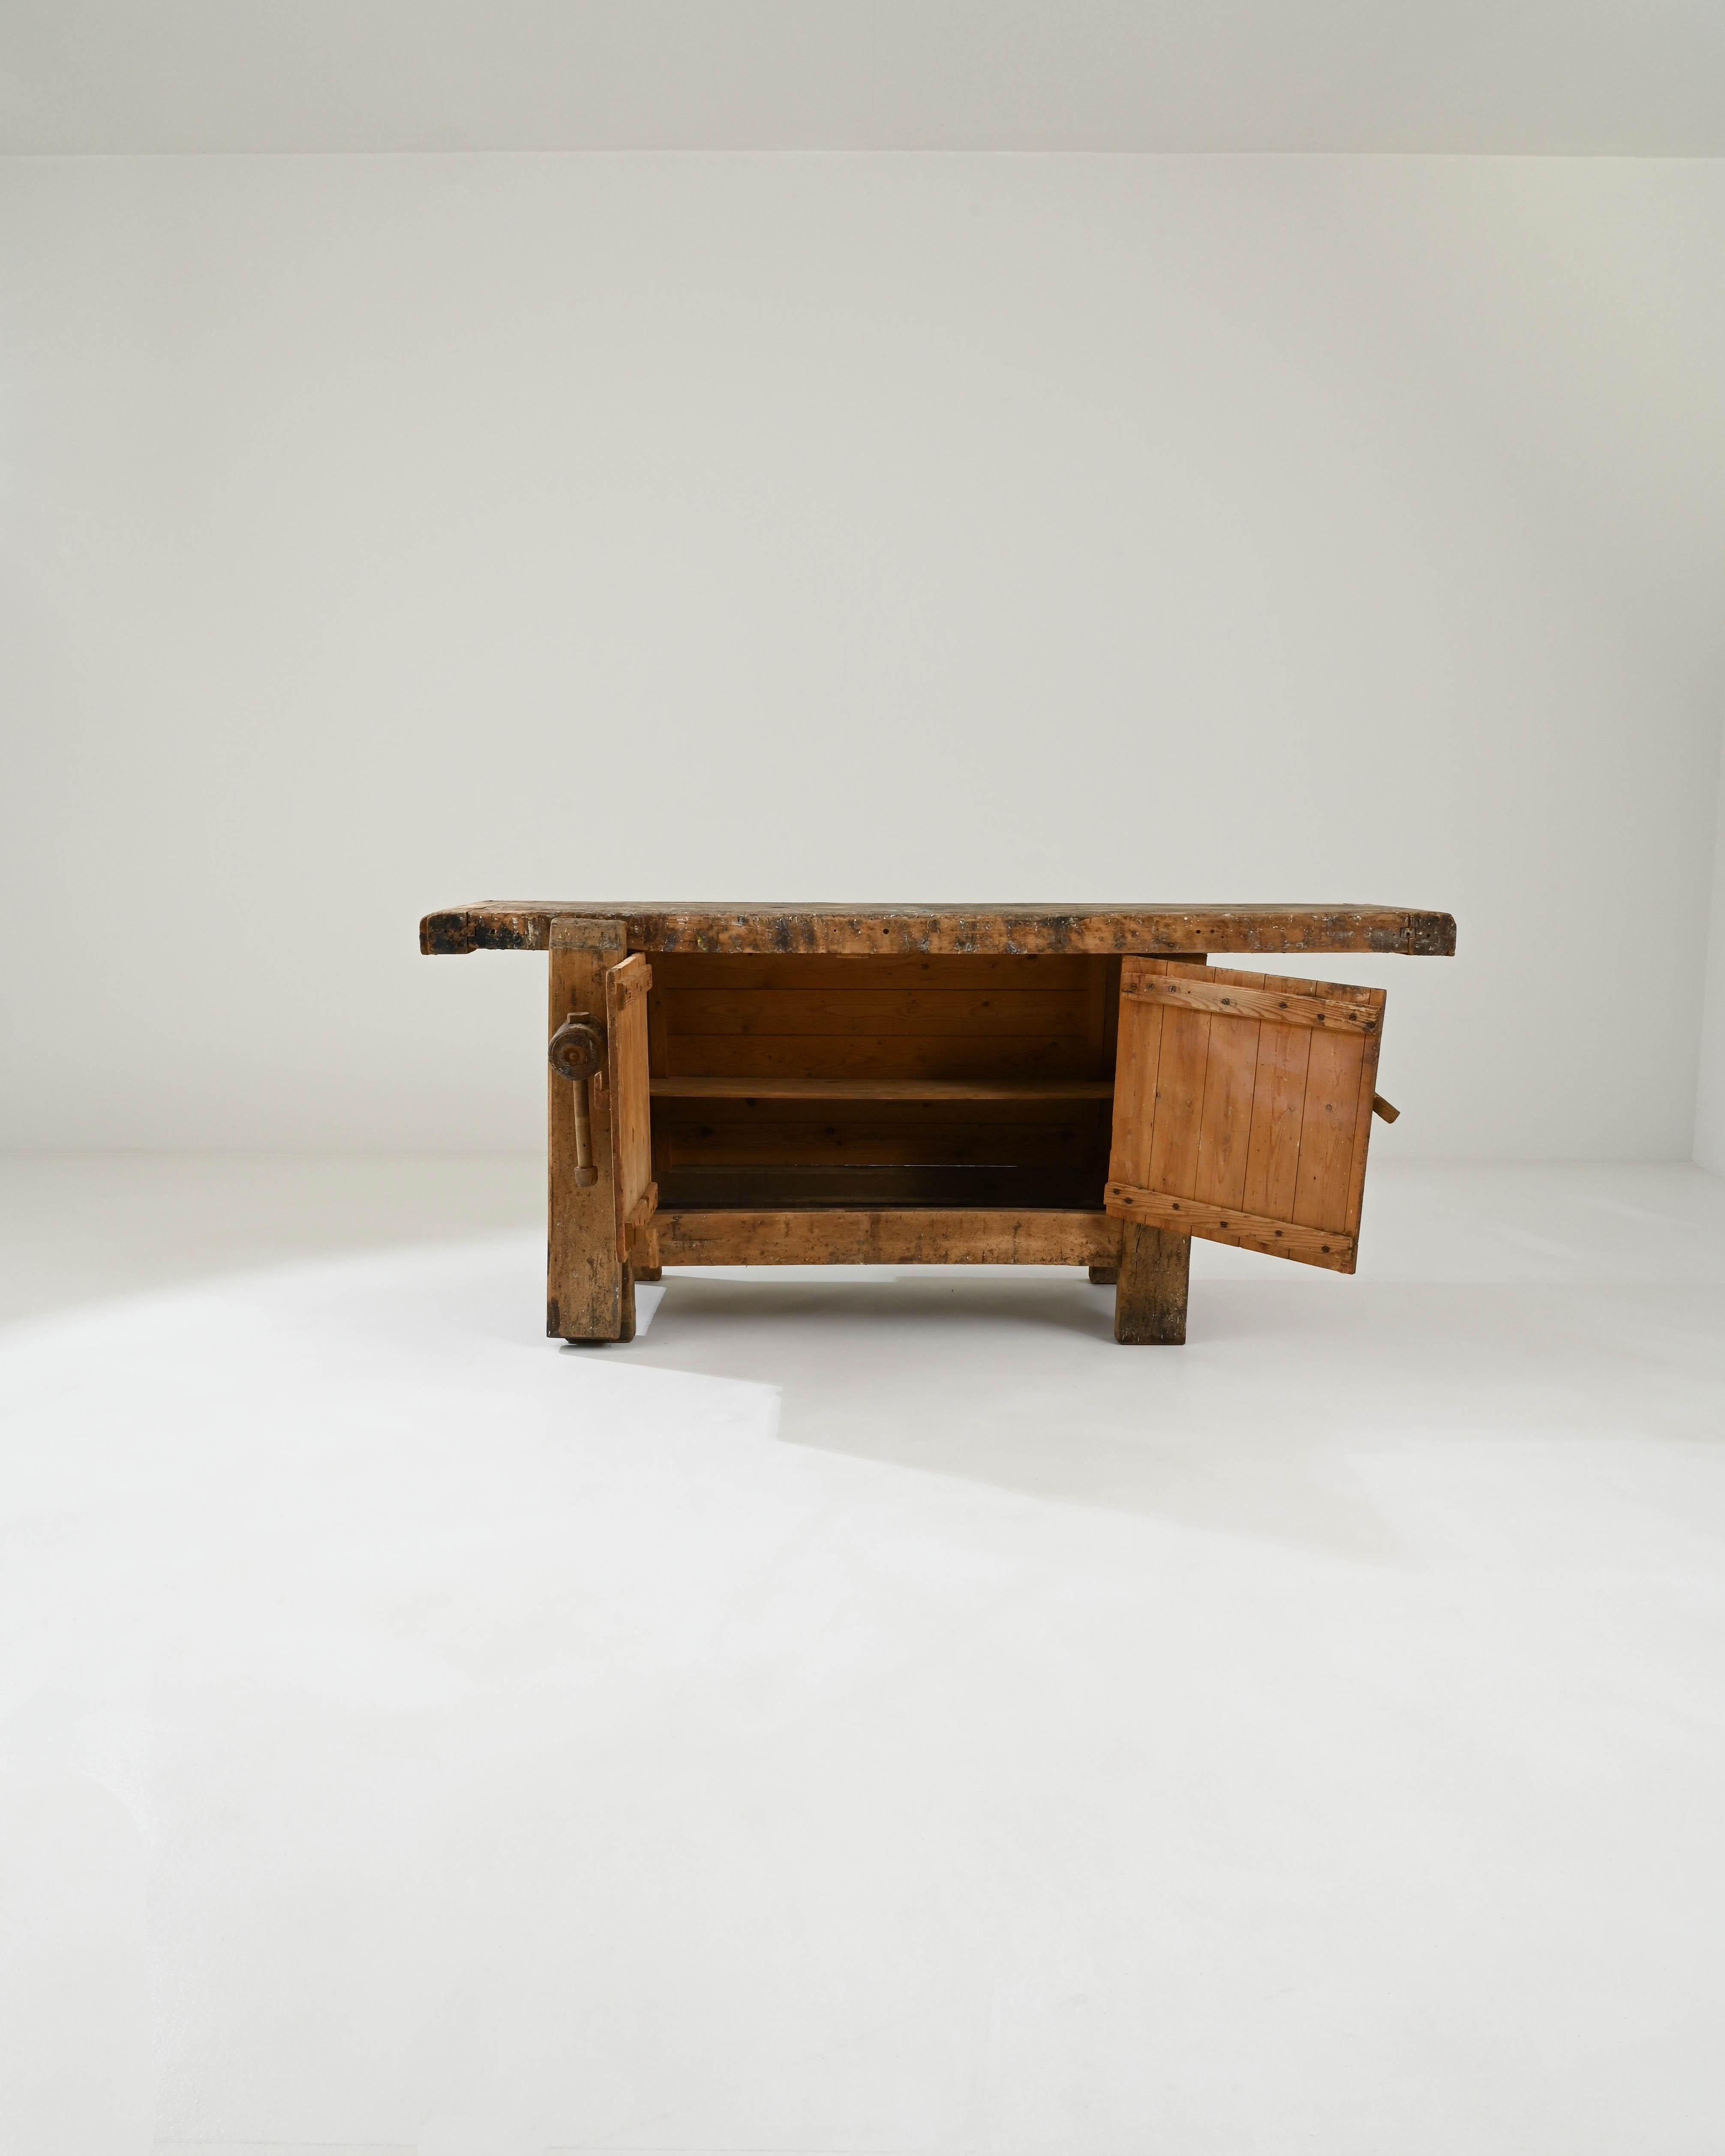 Rustic Early 20th Century Belgian Wooden Work Table